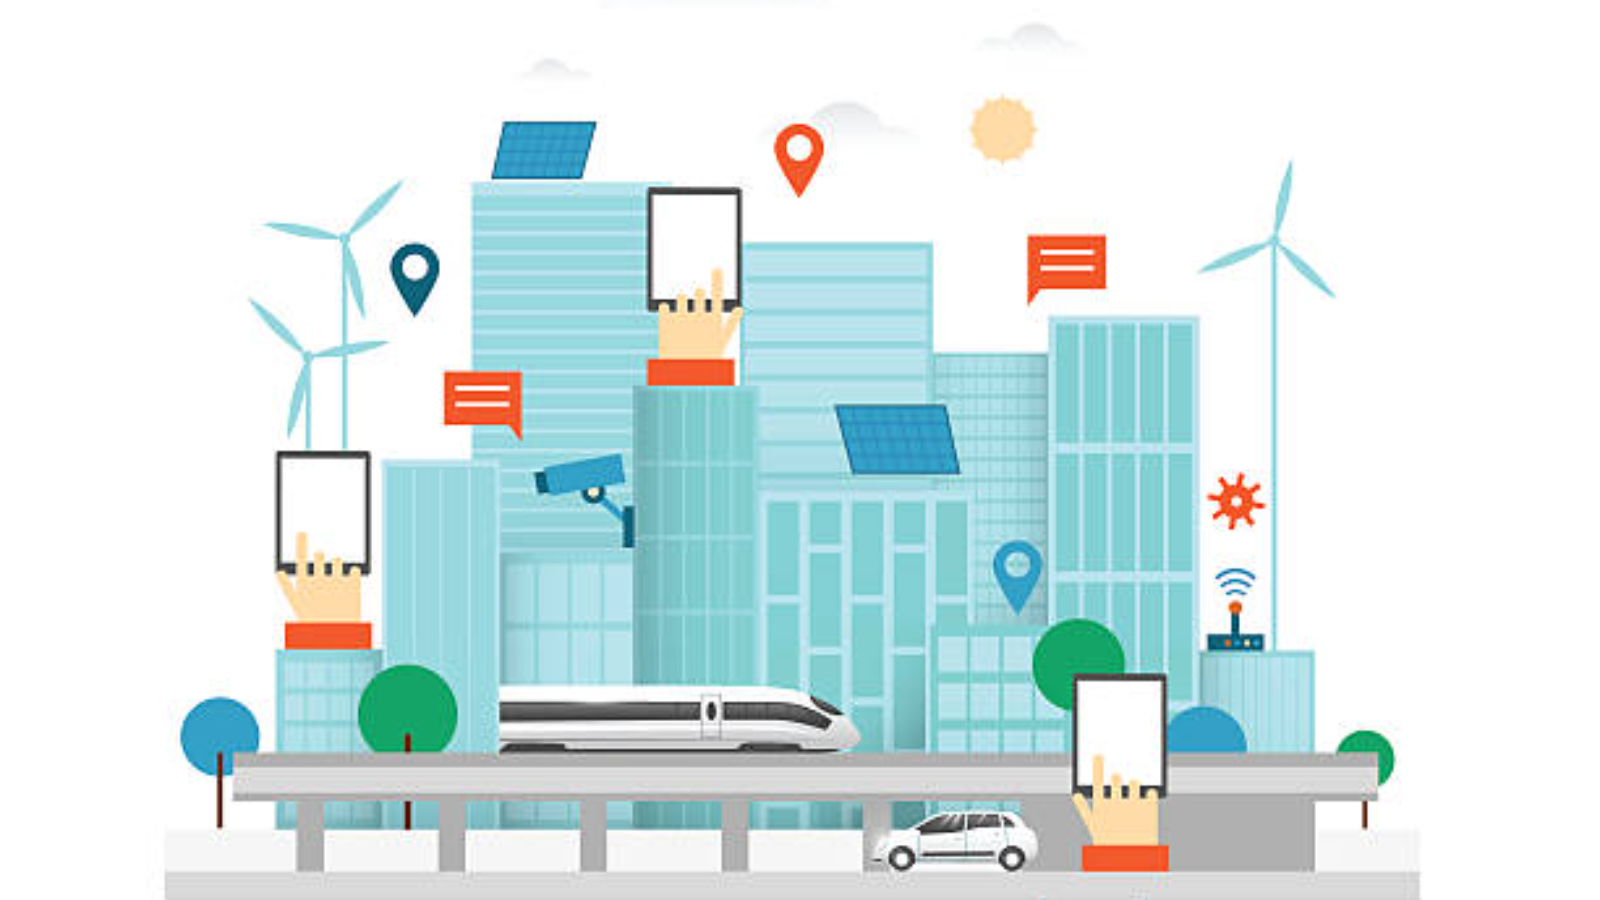 What Does a Smart City Look Like